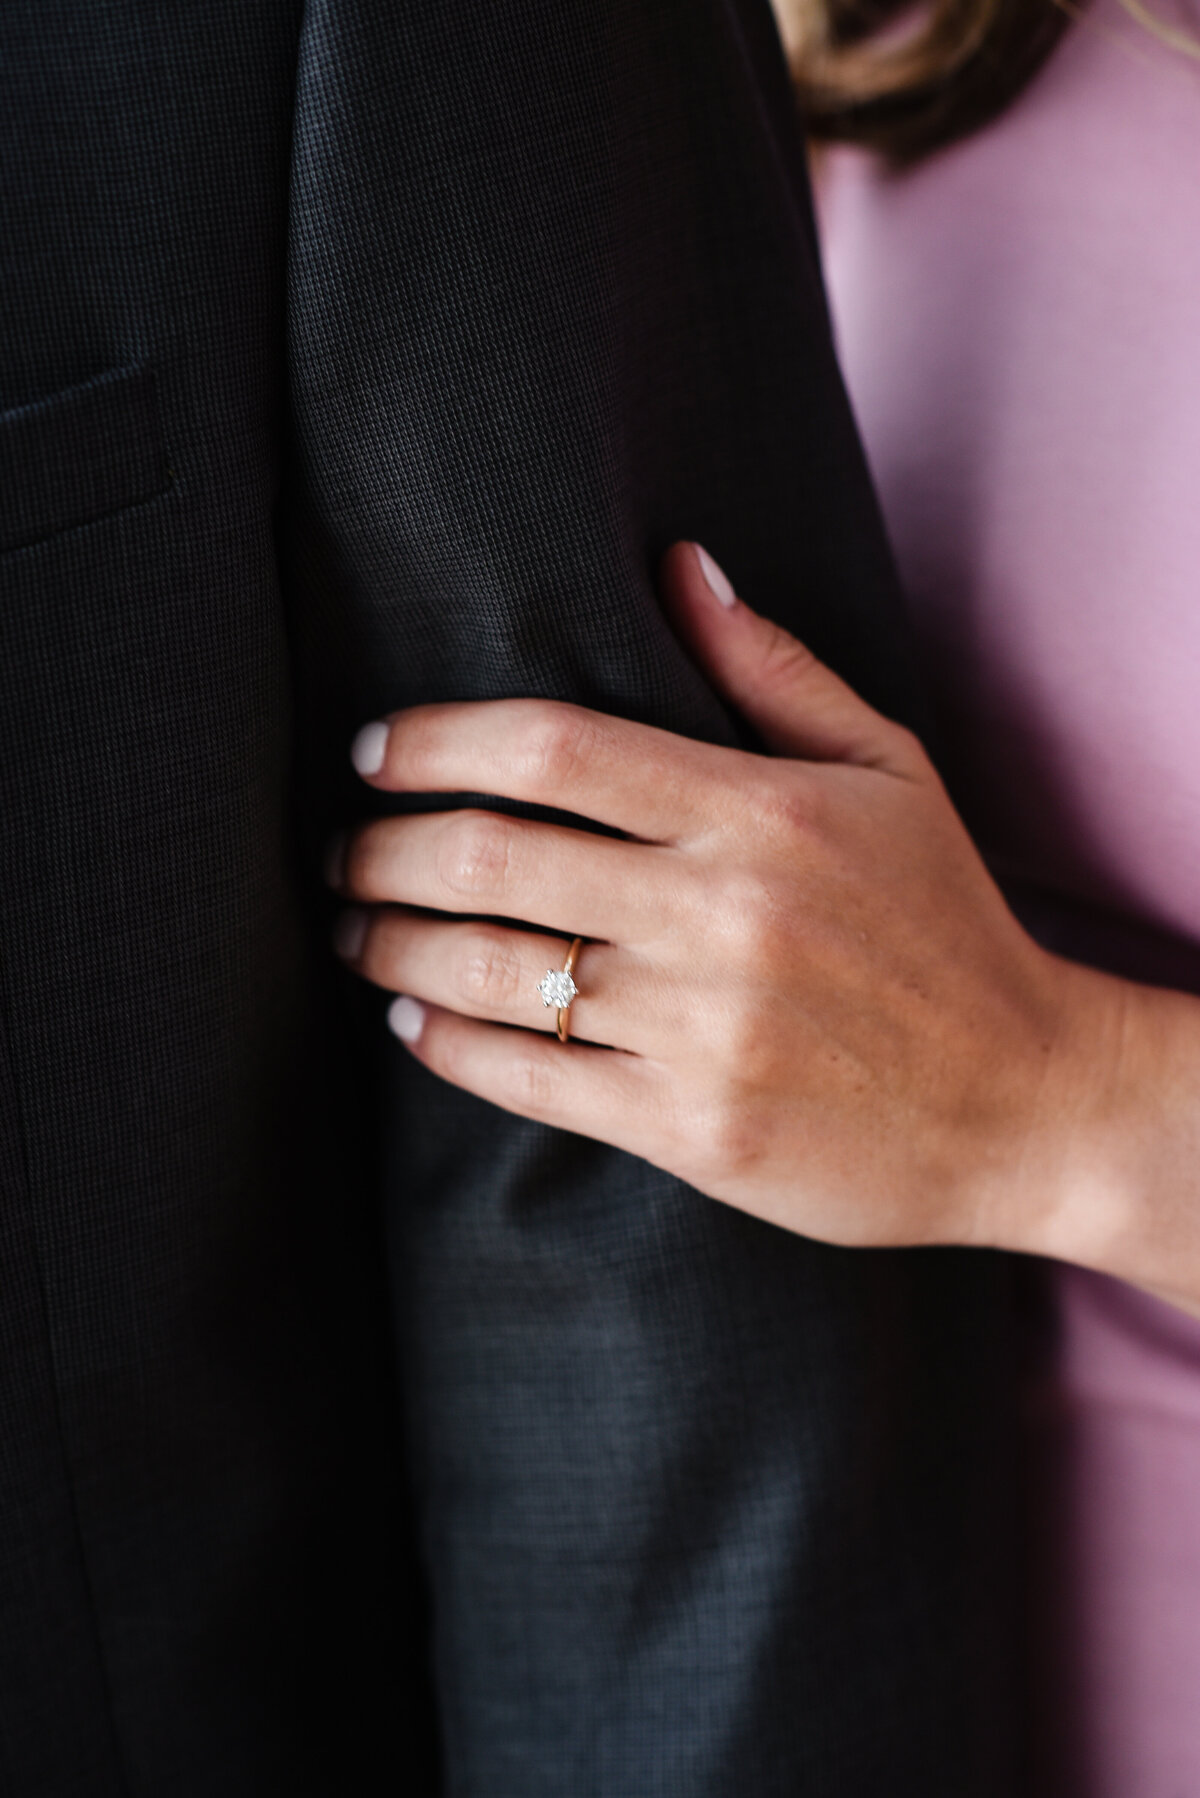 Beautiful Mississippi Engagement Photography: lady shows ring off on gentleman's arm, Biloxi Mississippi Wedding Photographer